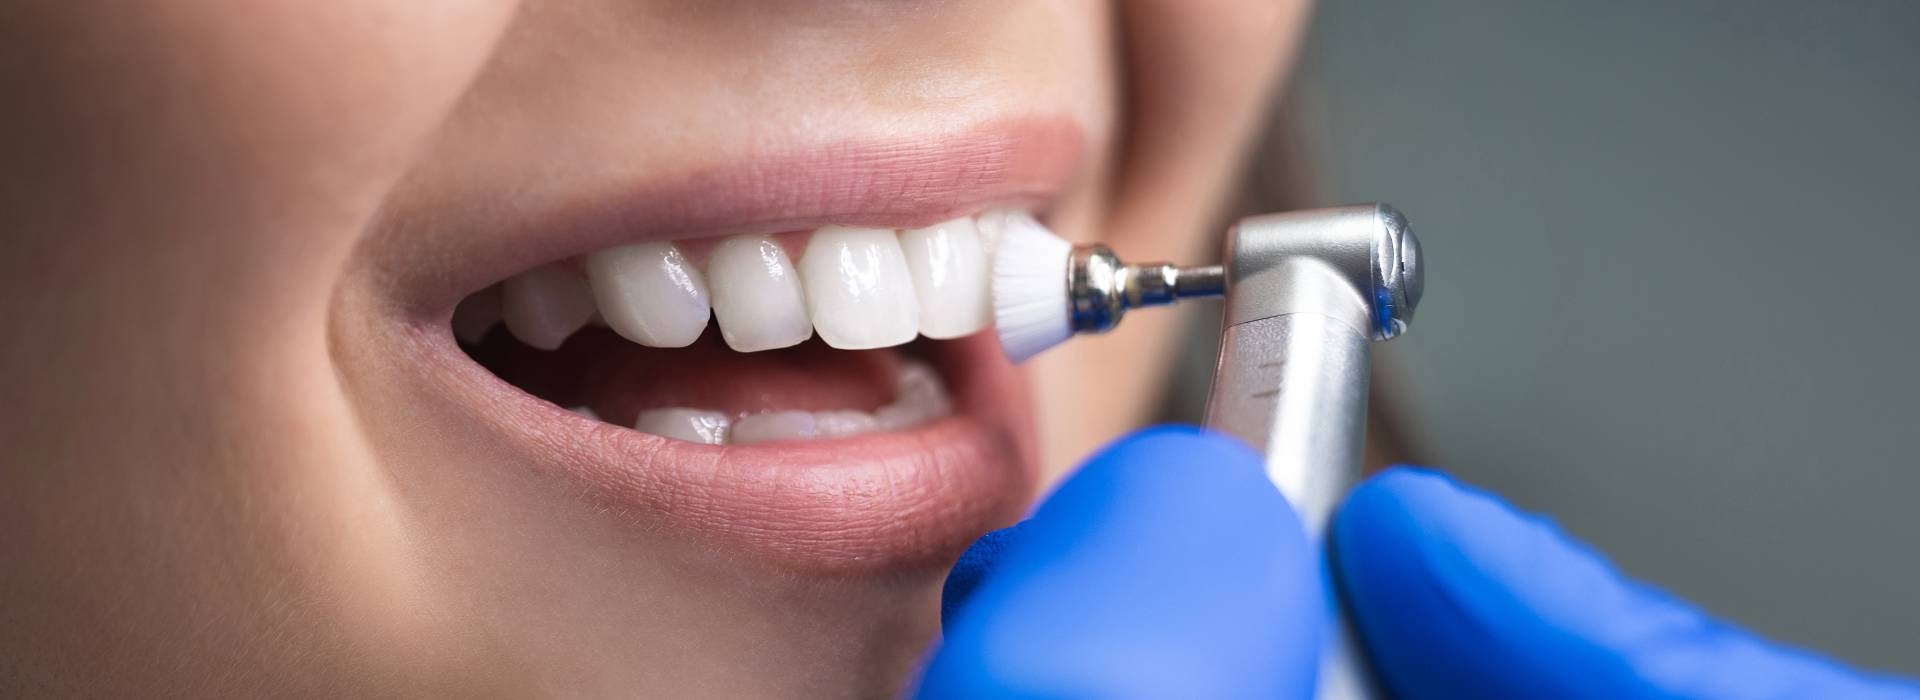 periodontal therapy services